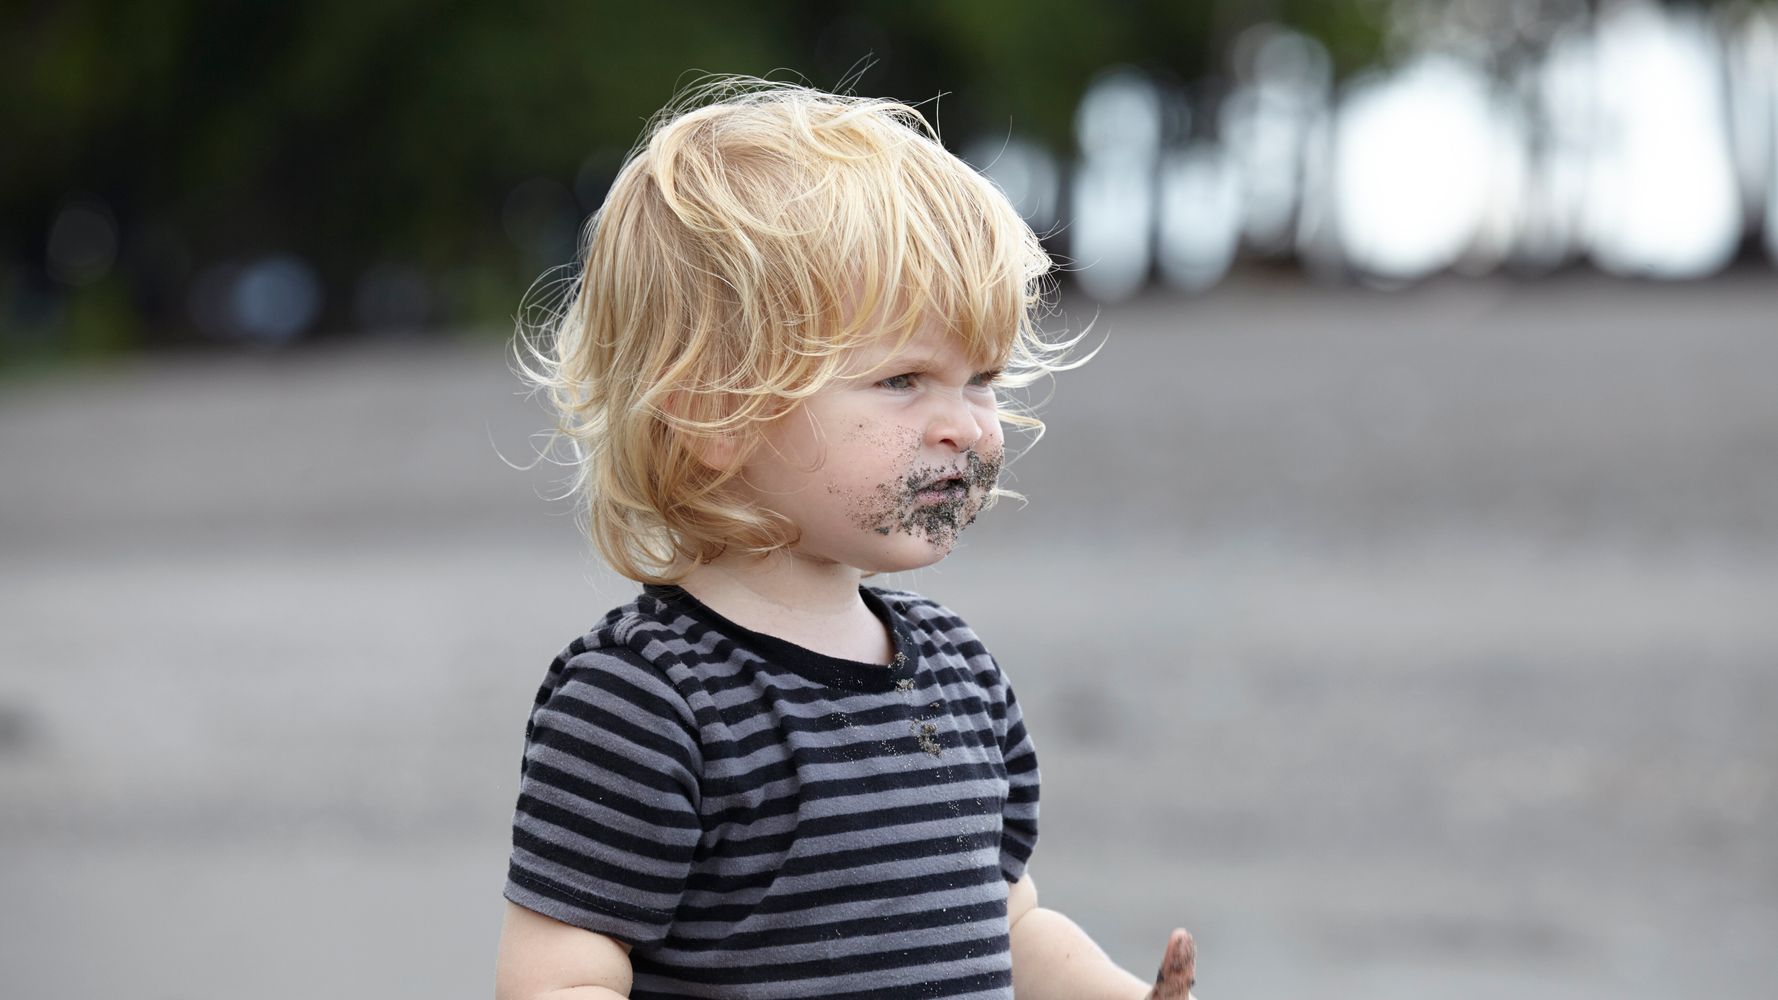 Kids Eating Sand How Worried Do Parents Need To Be About Feces Huffpost Canada Parents